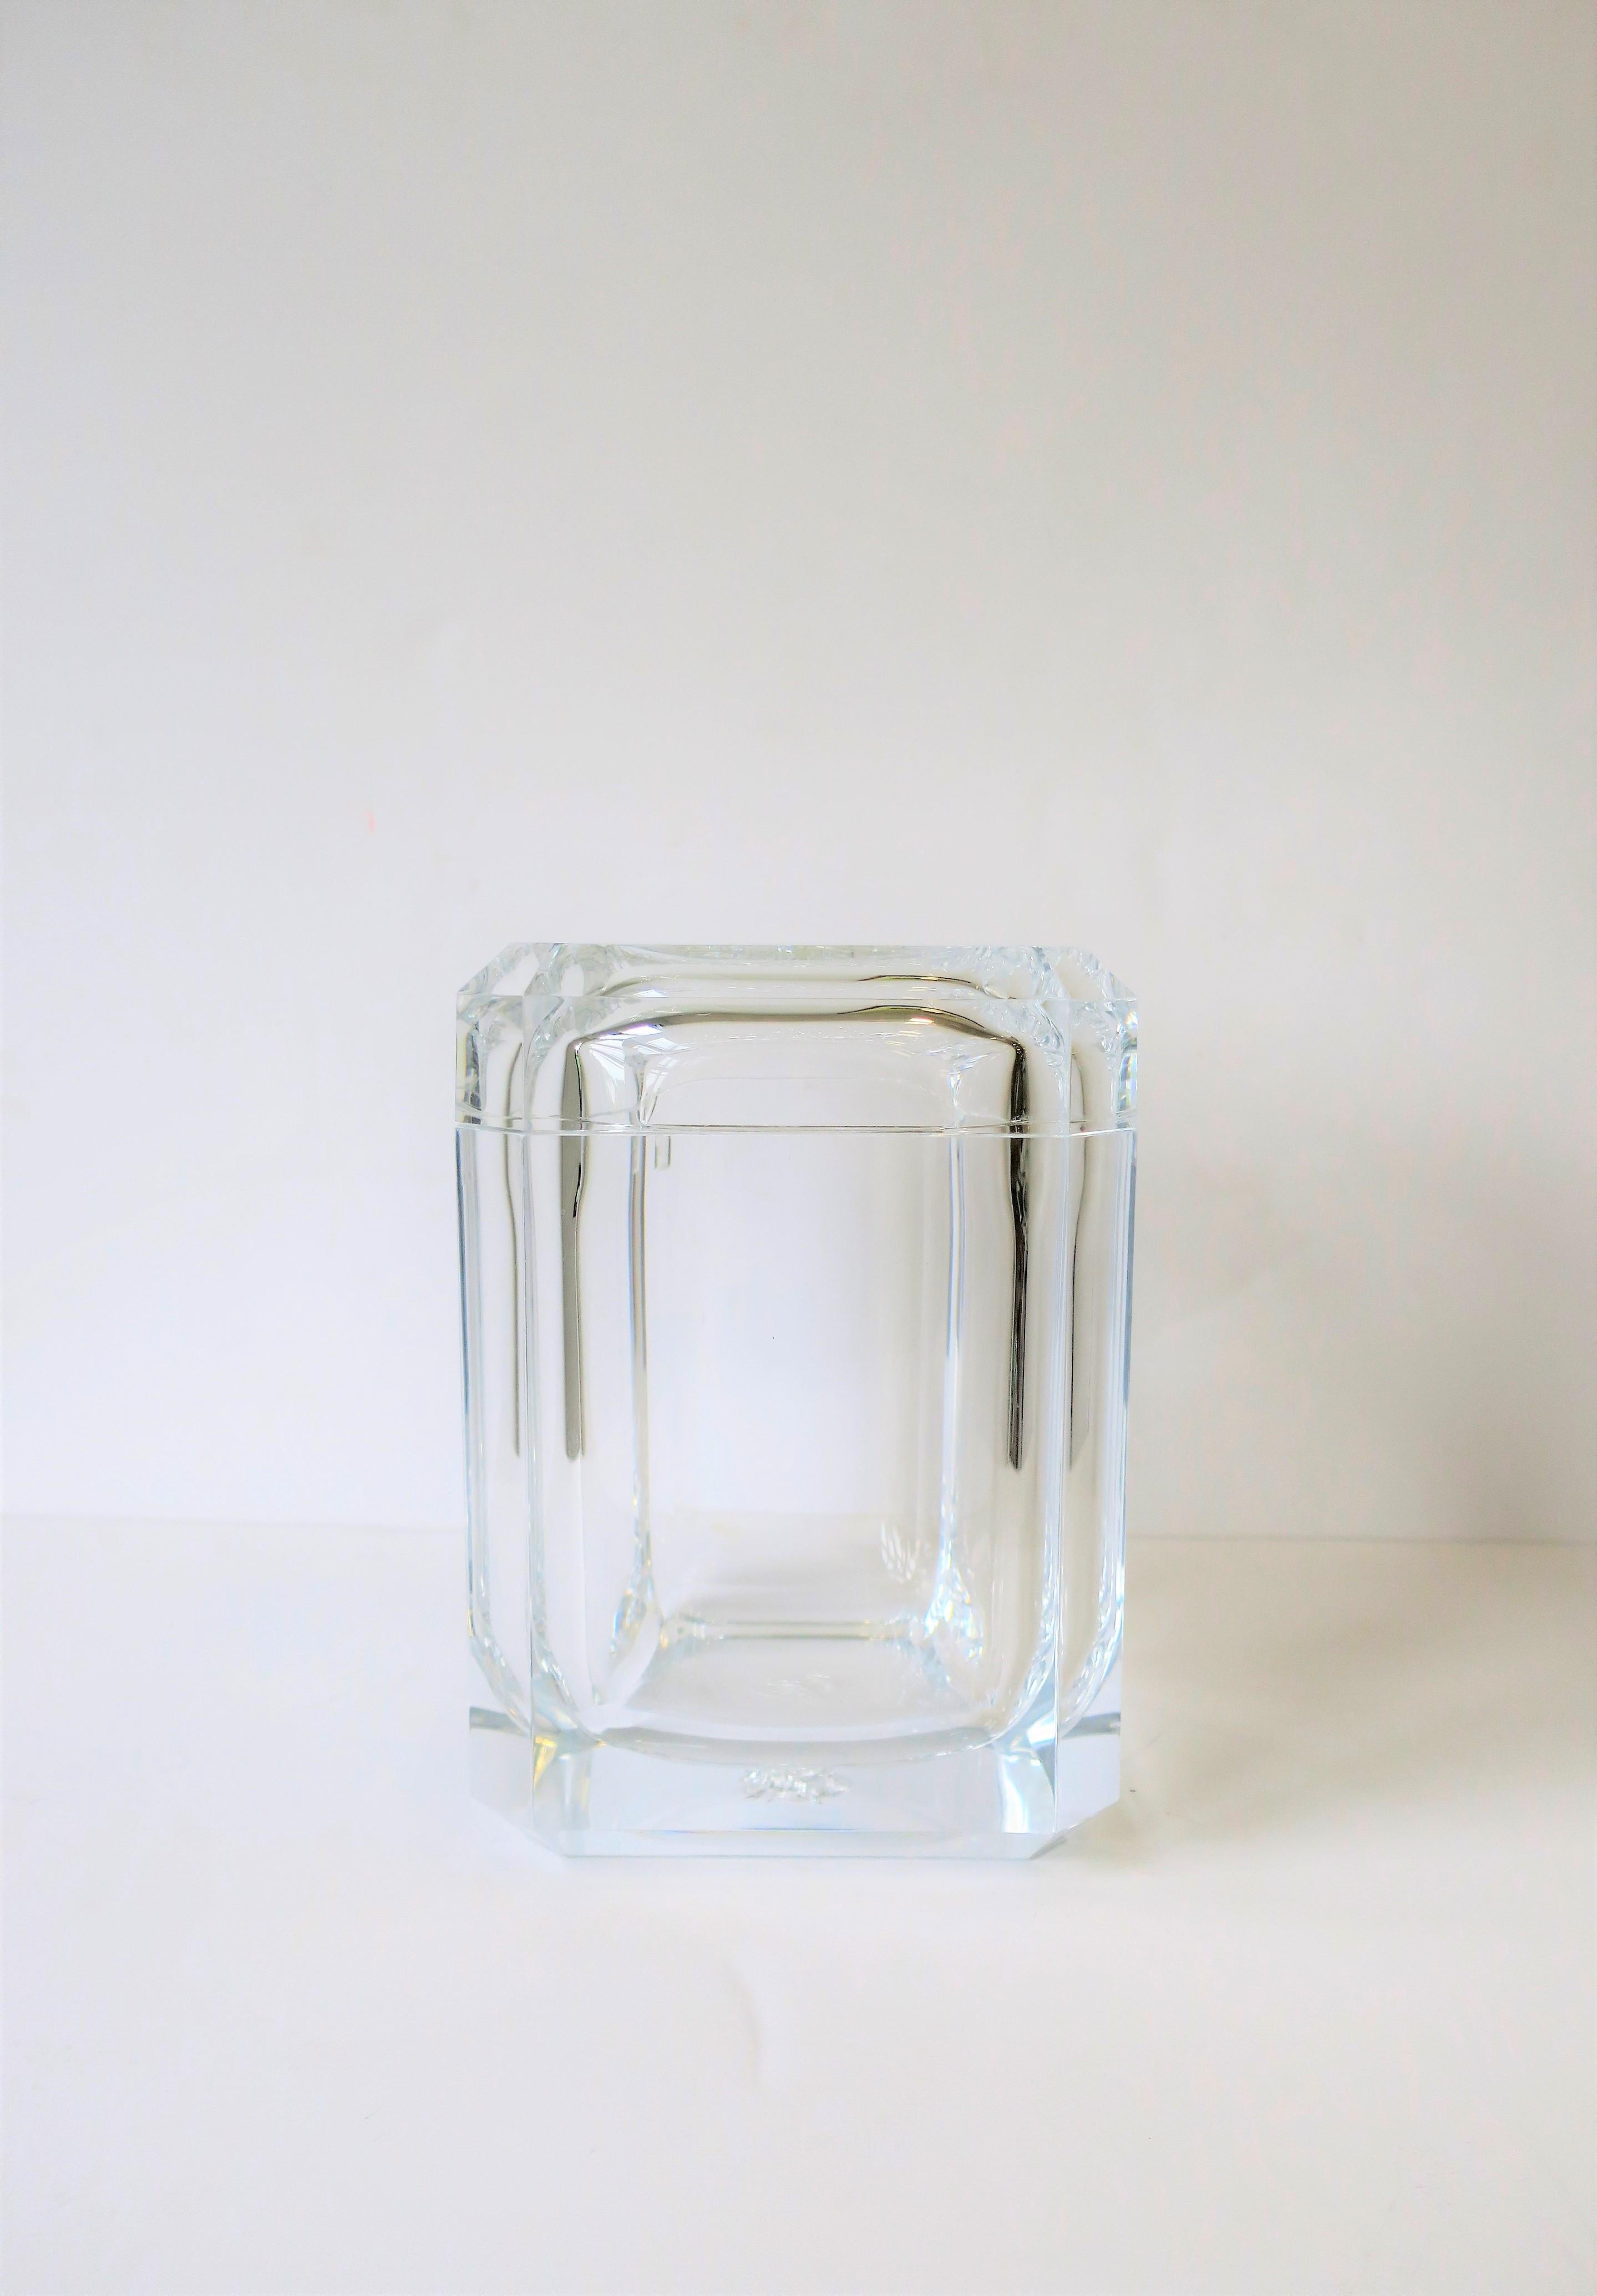 A Lucite modern style ice bucket or Lucite box with a swivel top. This is a thick rectangular Lucite ice bucket with tapered corners and a top that swivels both left and right or can completely come off (as show in images.) Piece can also be used as